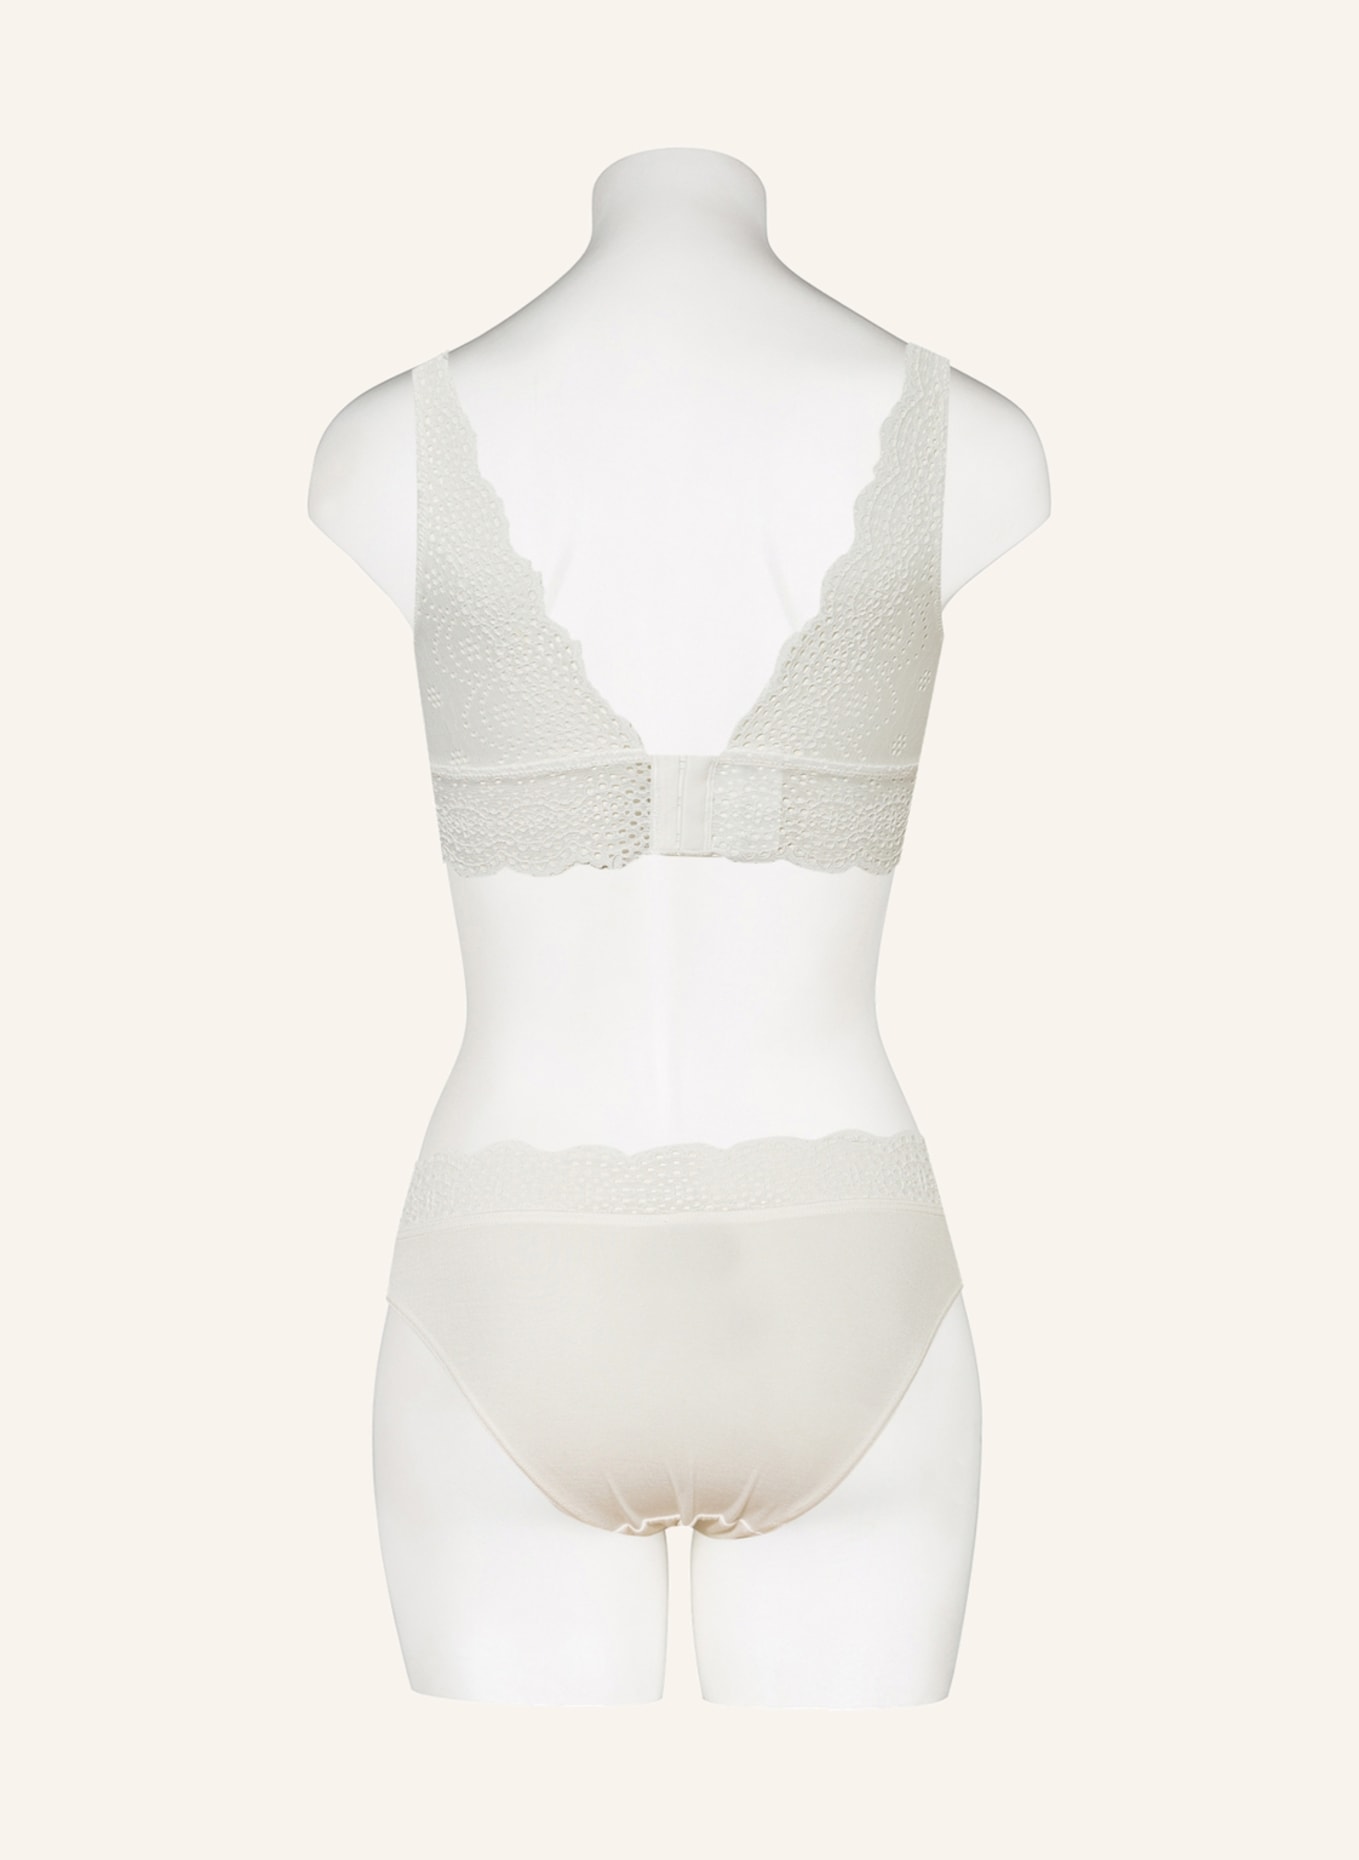 Skiny Bustier EVERY DAY IN BAMBOO LACE, Farbe: WEISS (Bild 3)